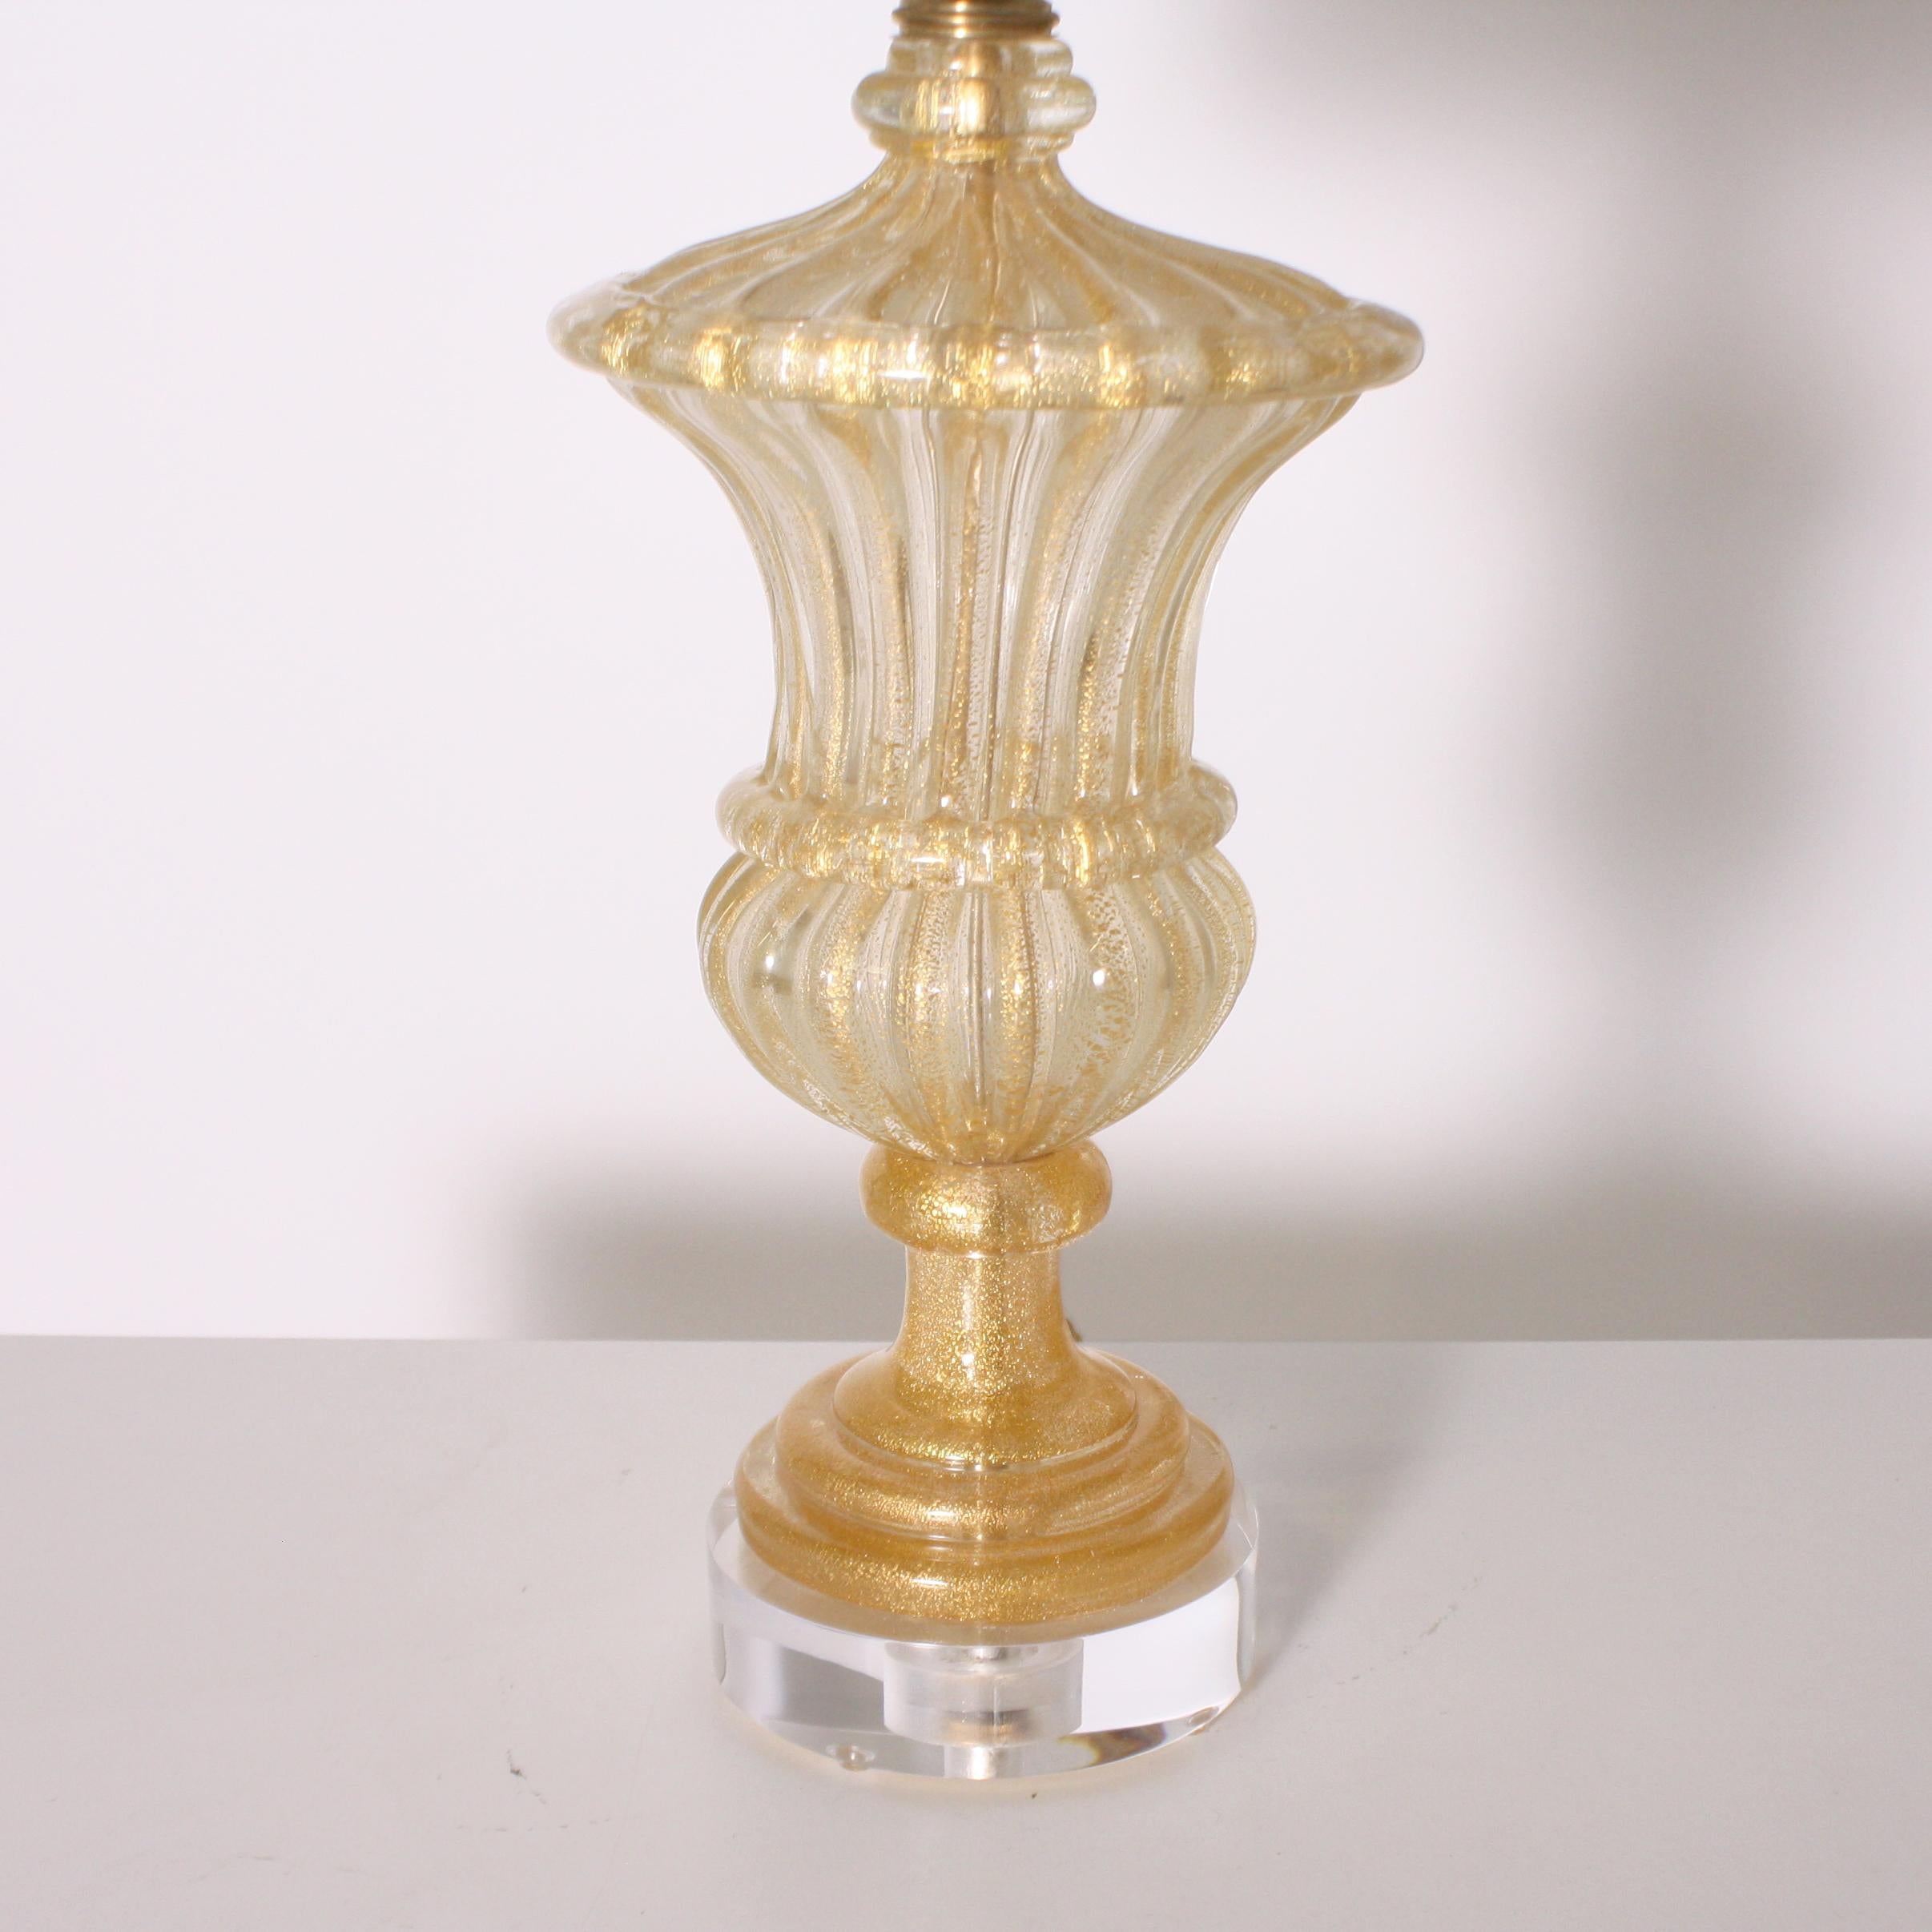 Gold Barovier & Toso lamp, circa 1950

Custom linen shade, crystal ball finial, Lucite base, gold twisted cording.